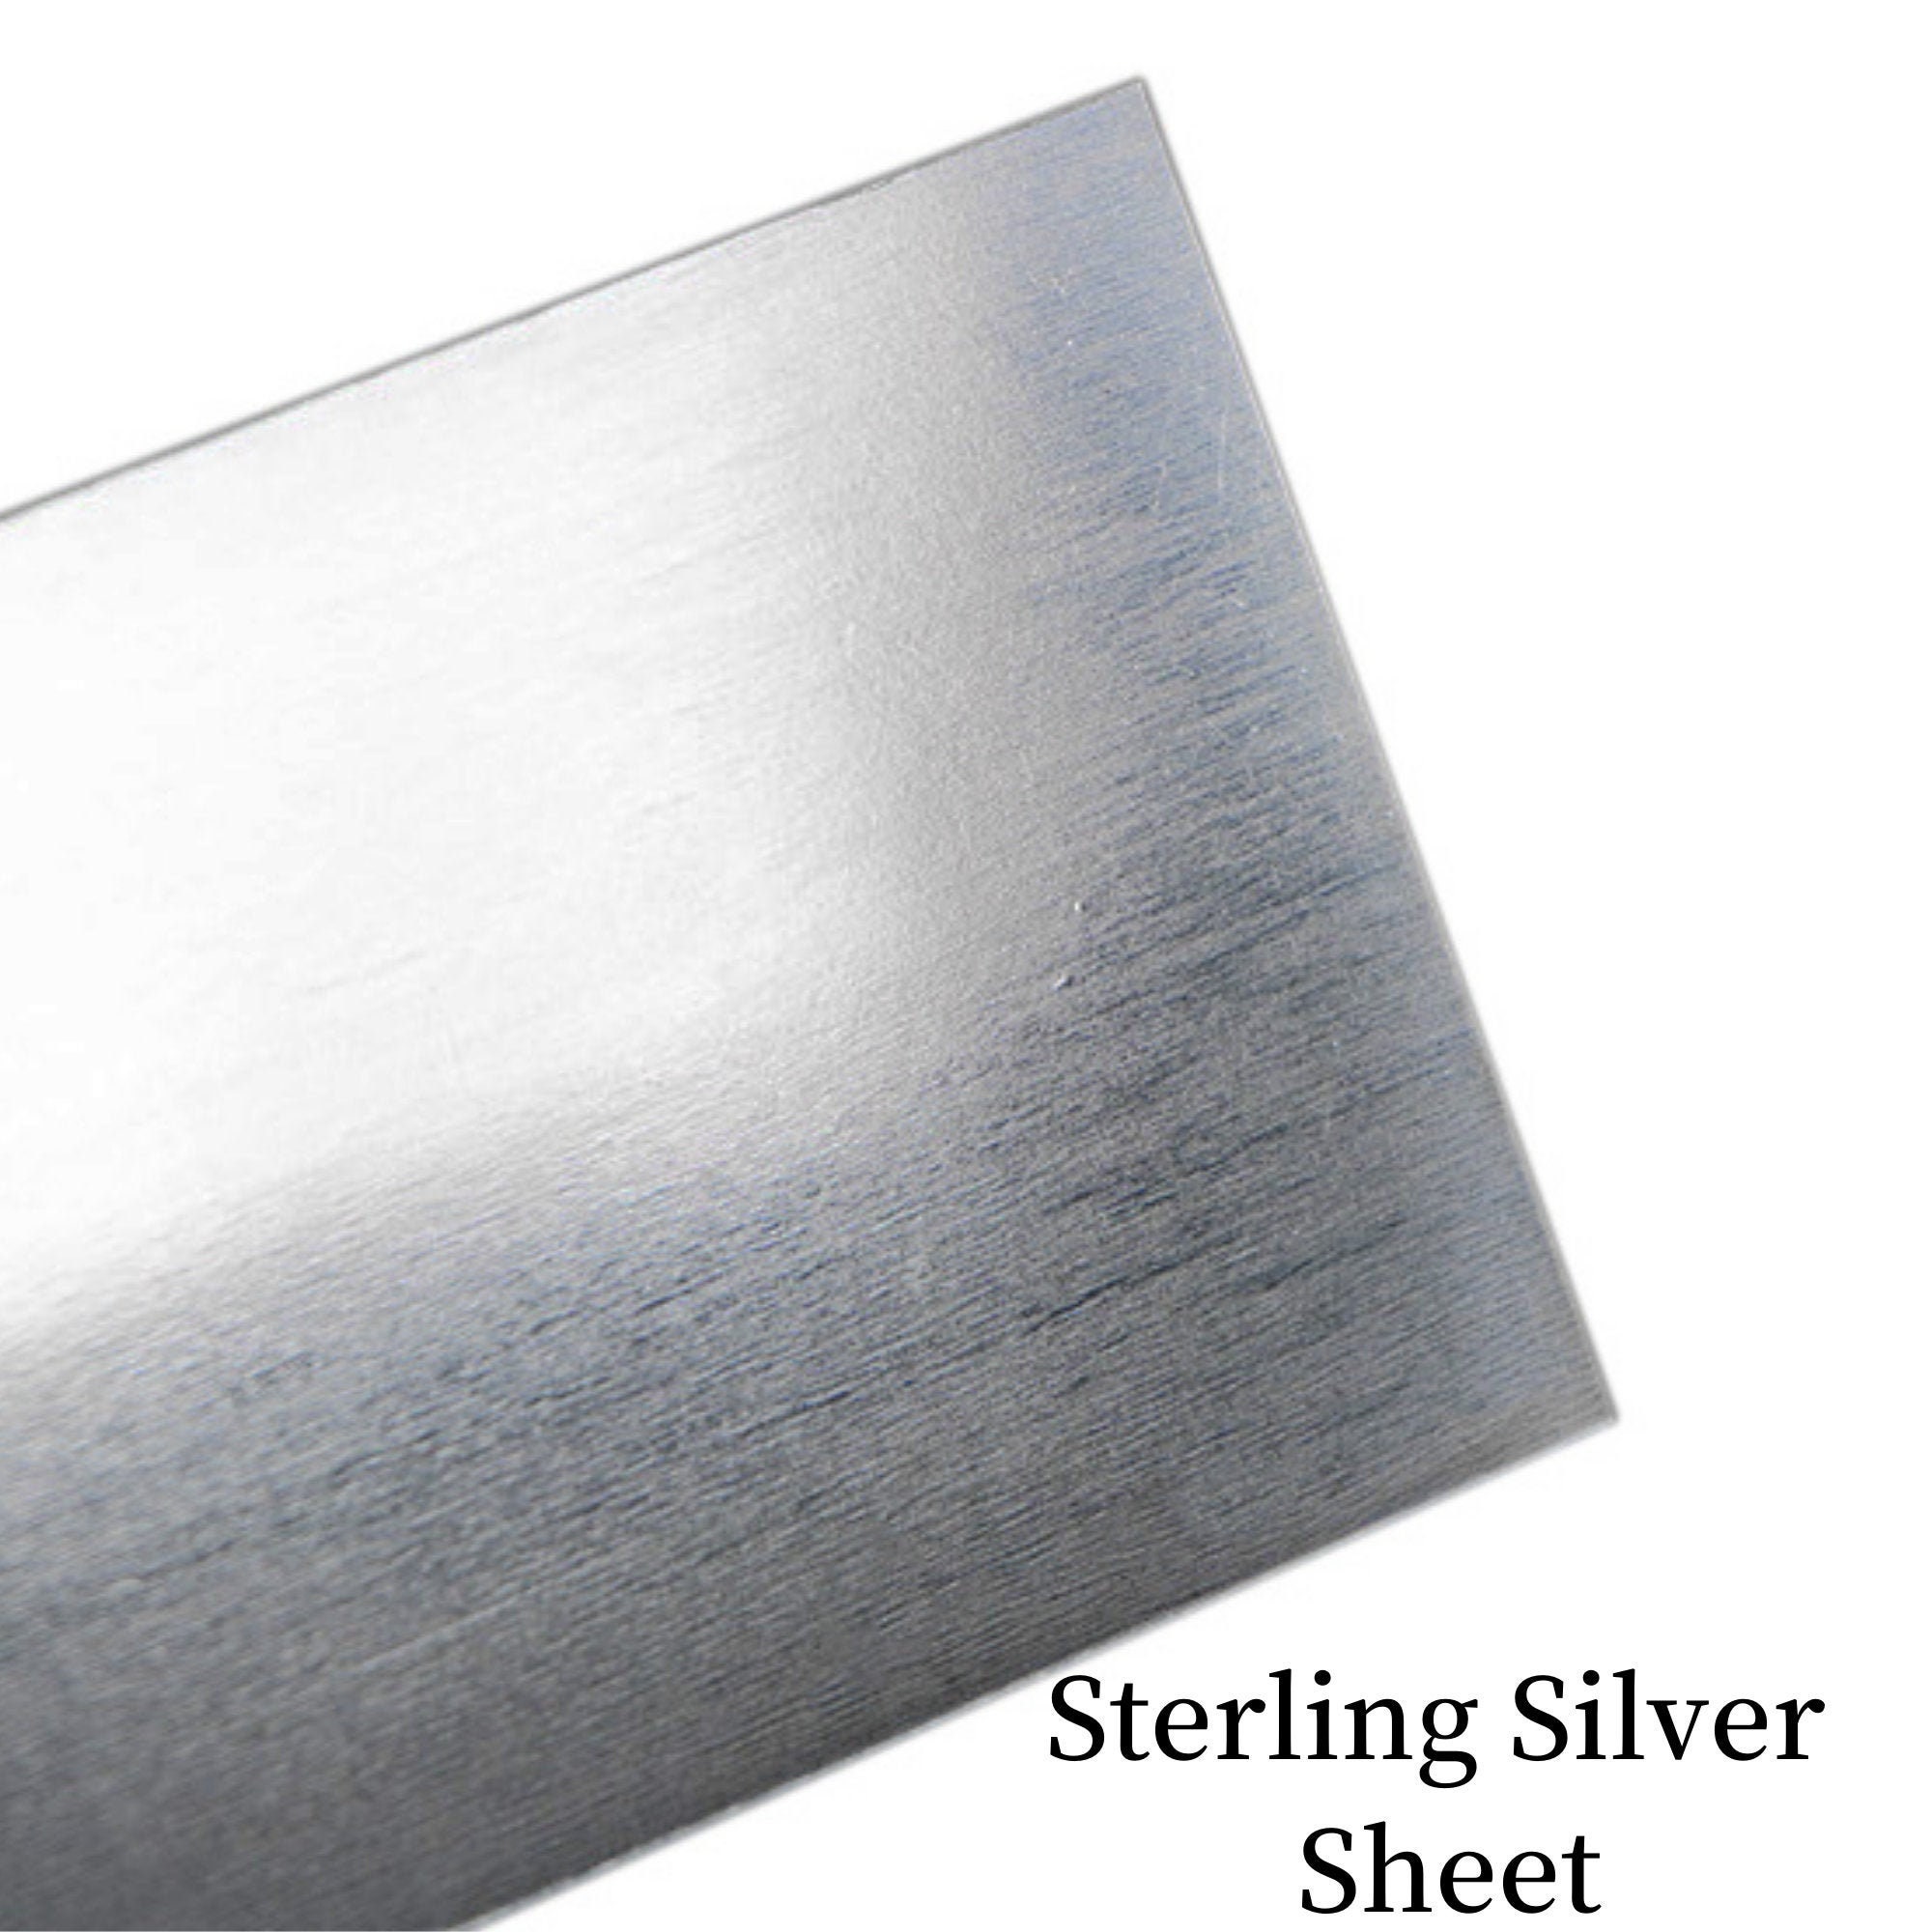  Bedrock Jewelry 6x1 Solid Sterling, .925 Silver Sheet , 24  Gauge Dead Soft, Made in USA : Arts, Crafts & Sewing